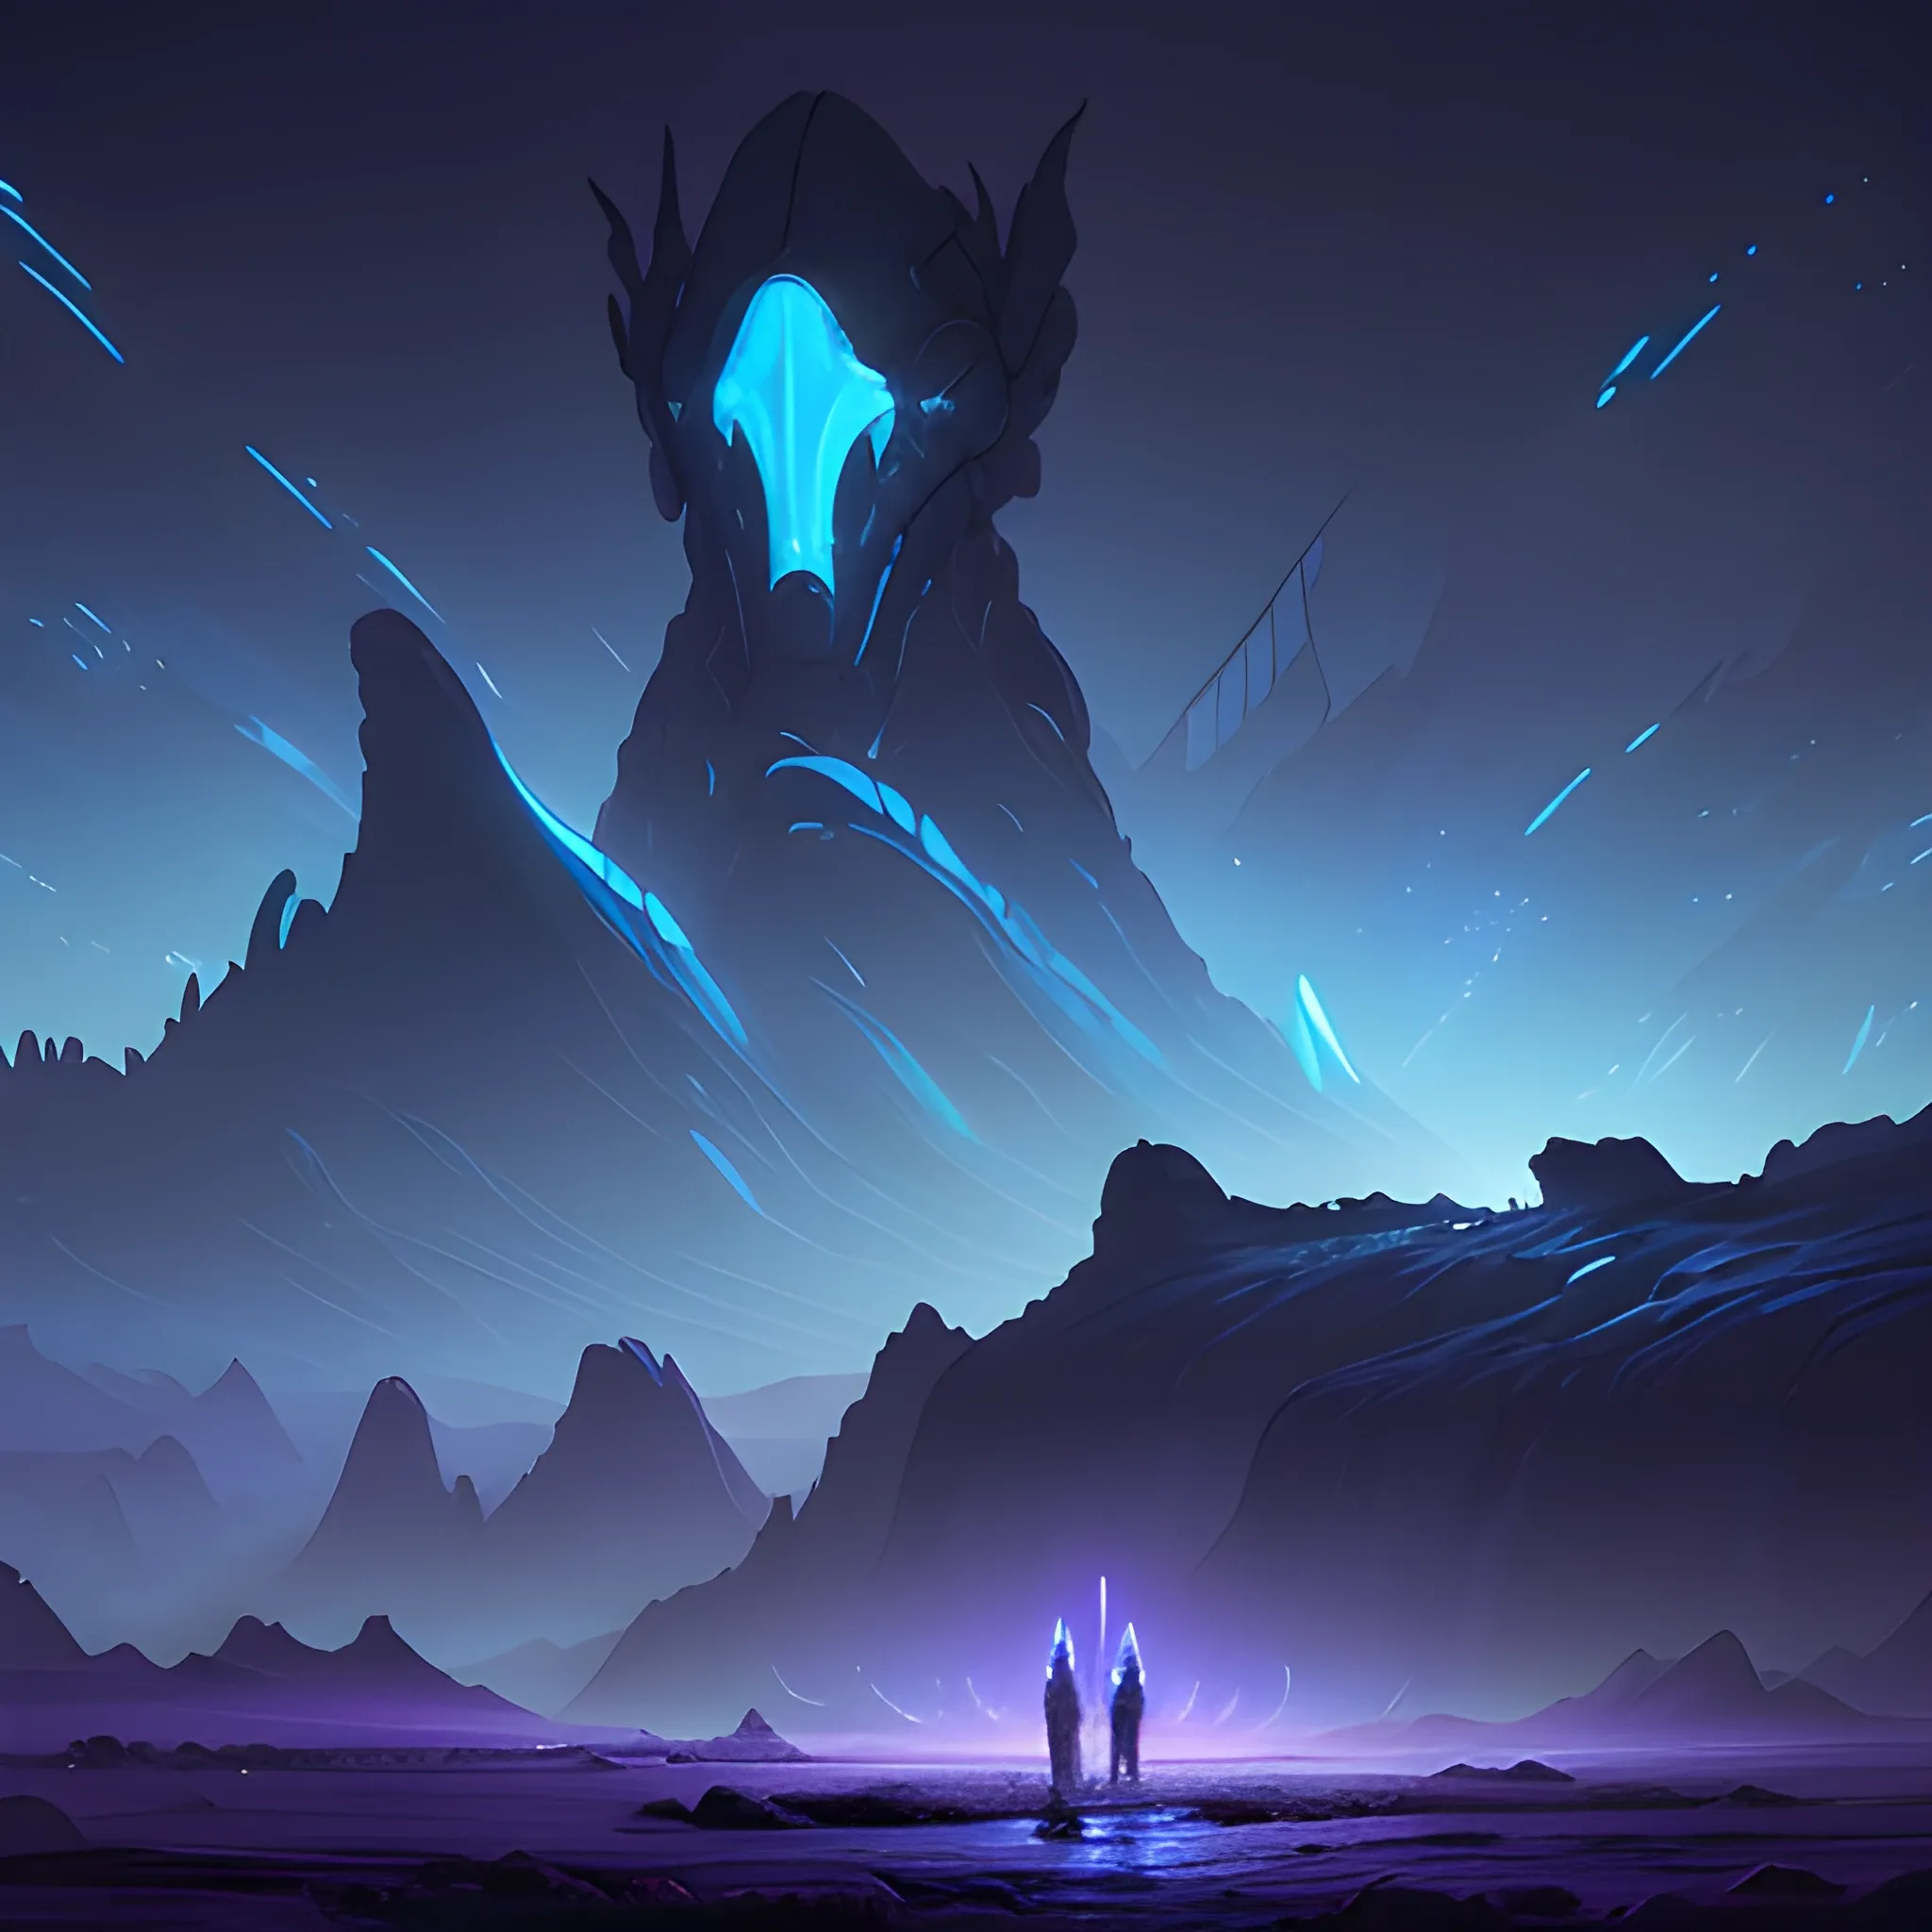 concept art painting of a fantasy alien heads landscape at night, with glowing blue lights, glowing blue heads, dark purple sky, realistic, detailed, cel shaded, in the style of makoto shinkai and greg rutkowski and albert bierstadt and james gurney

